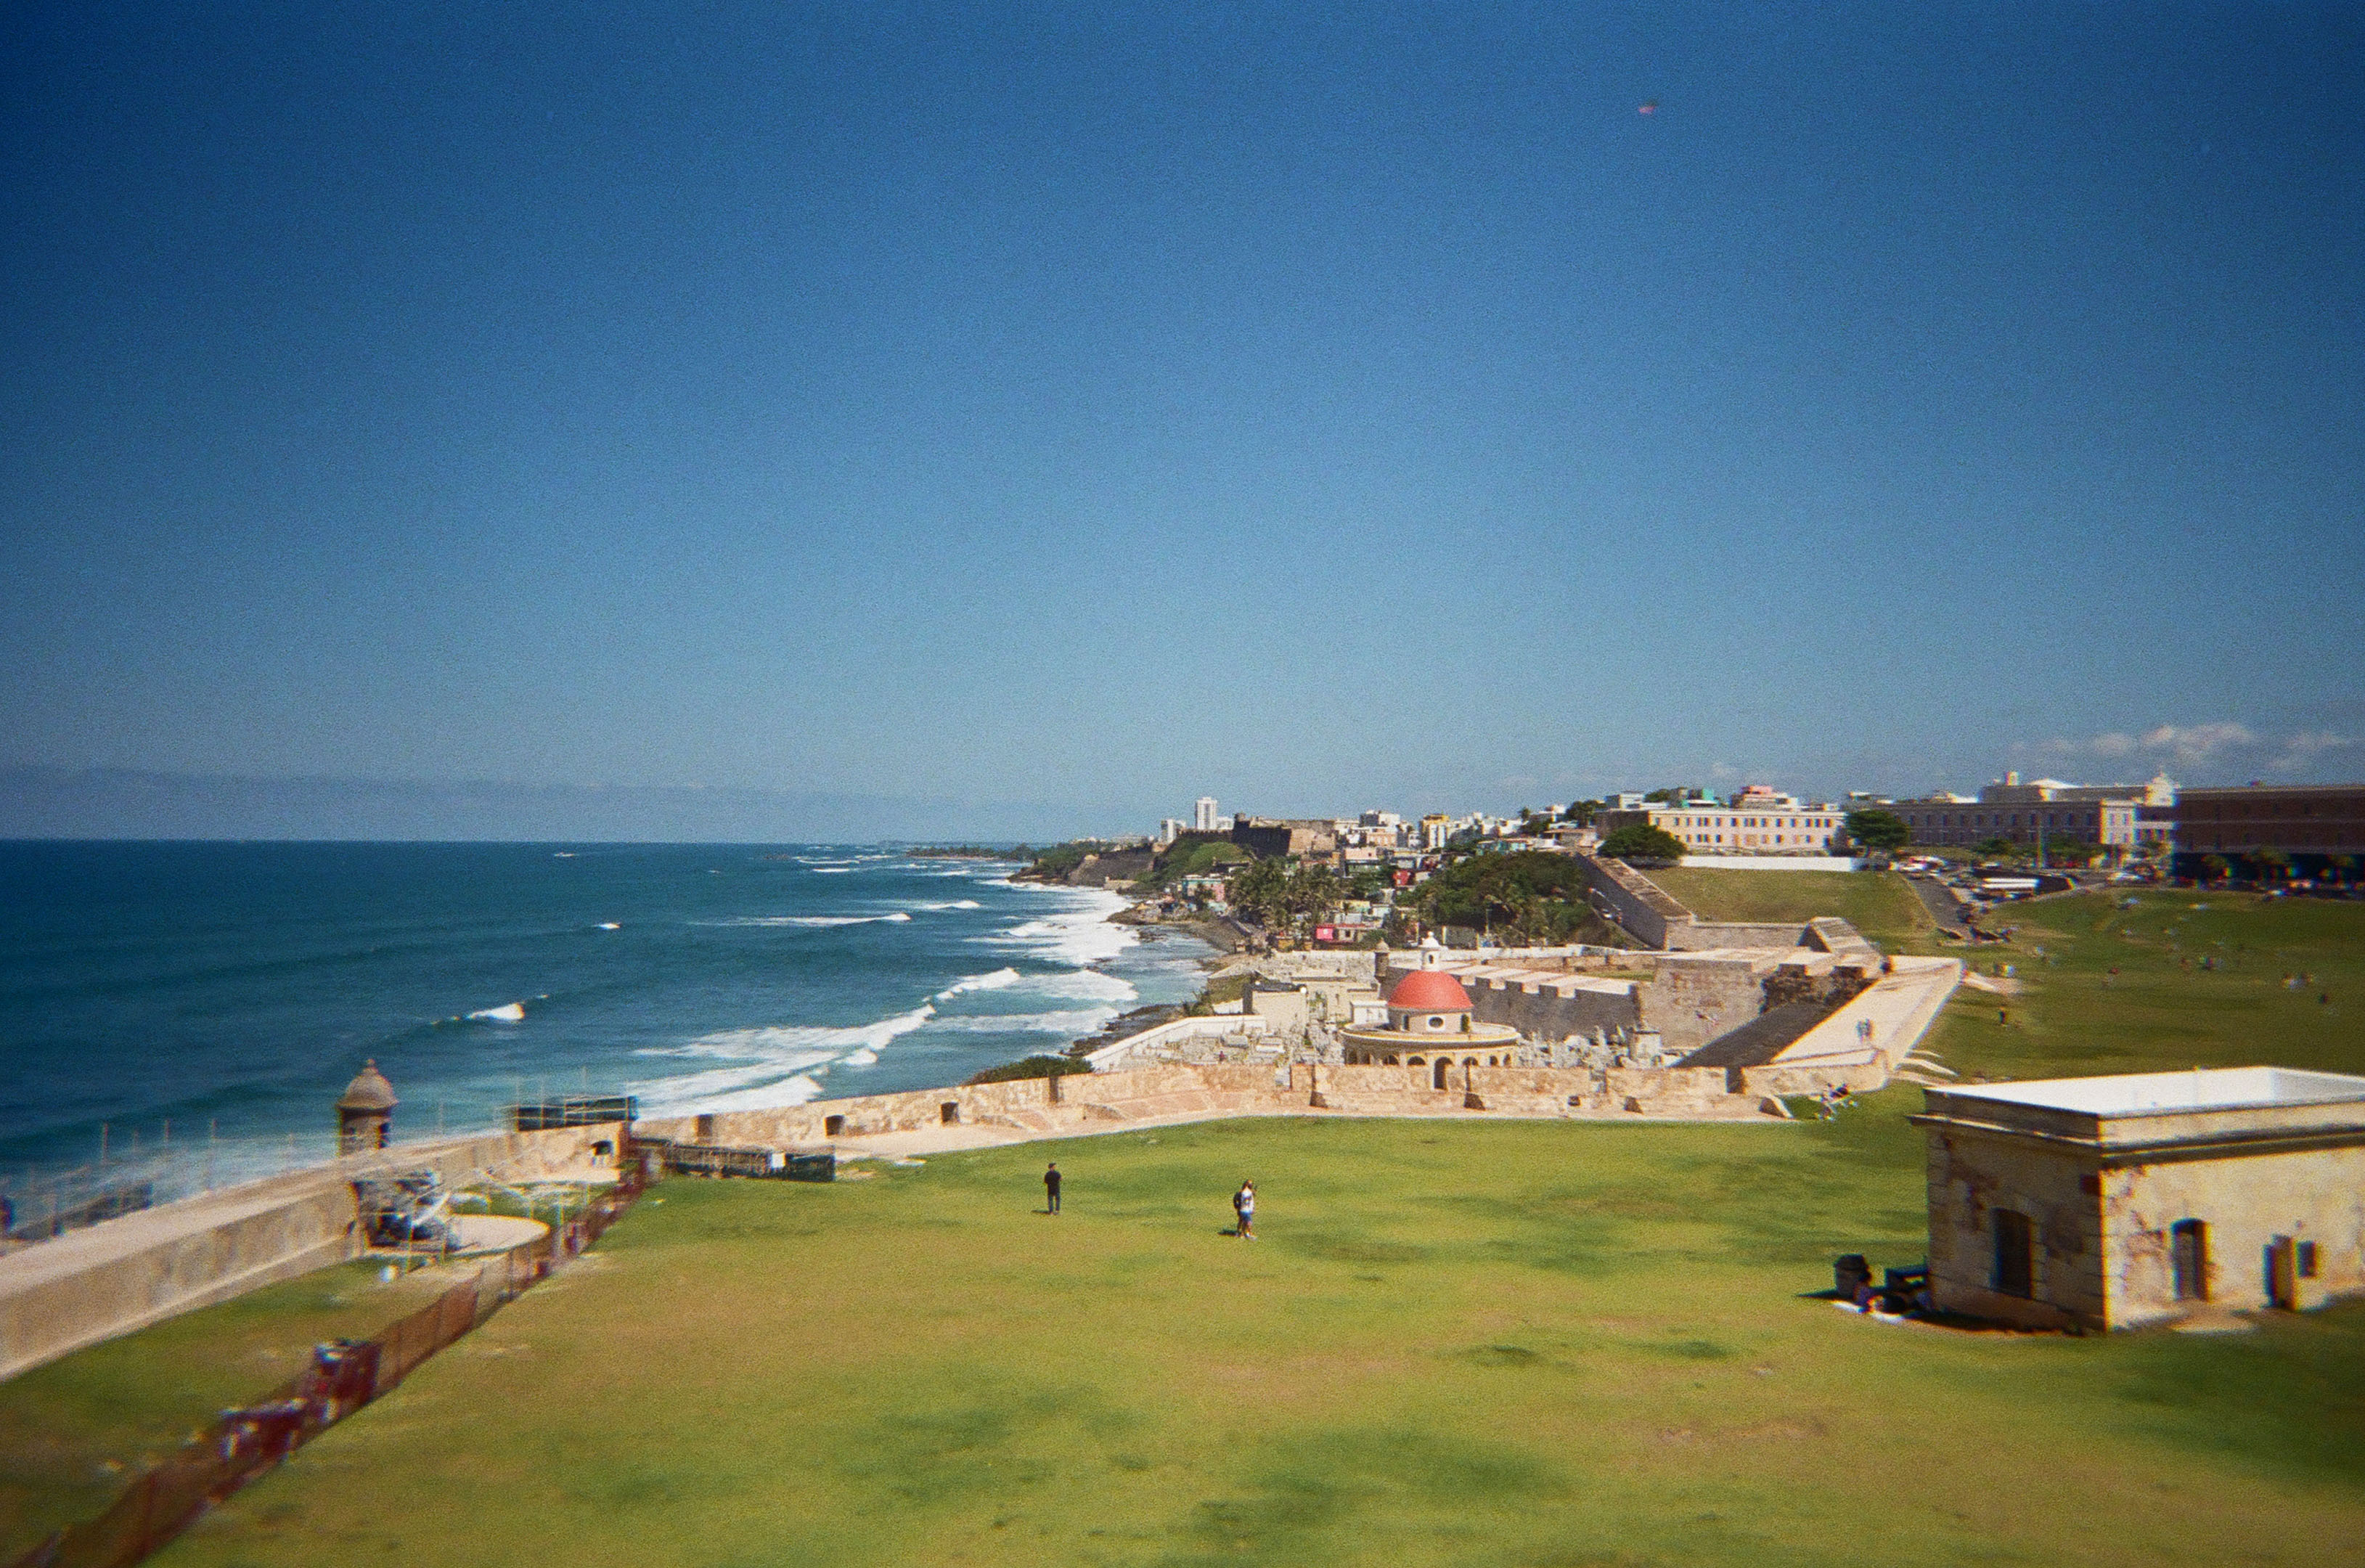 overlooking a big lawn and the city's coastline in the background